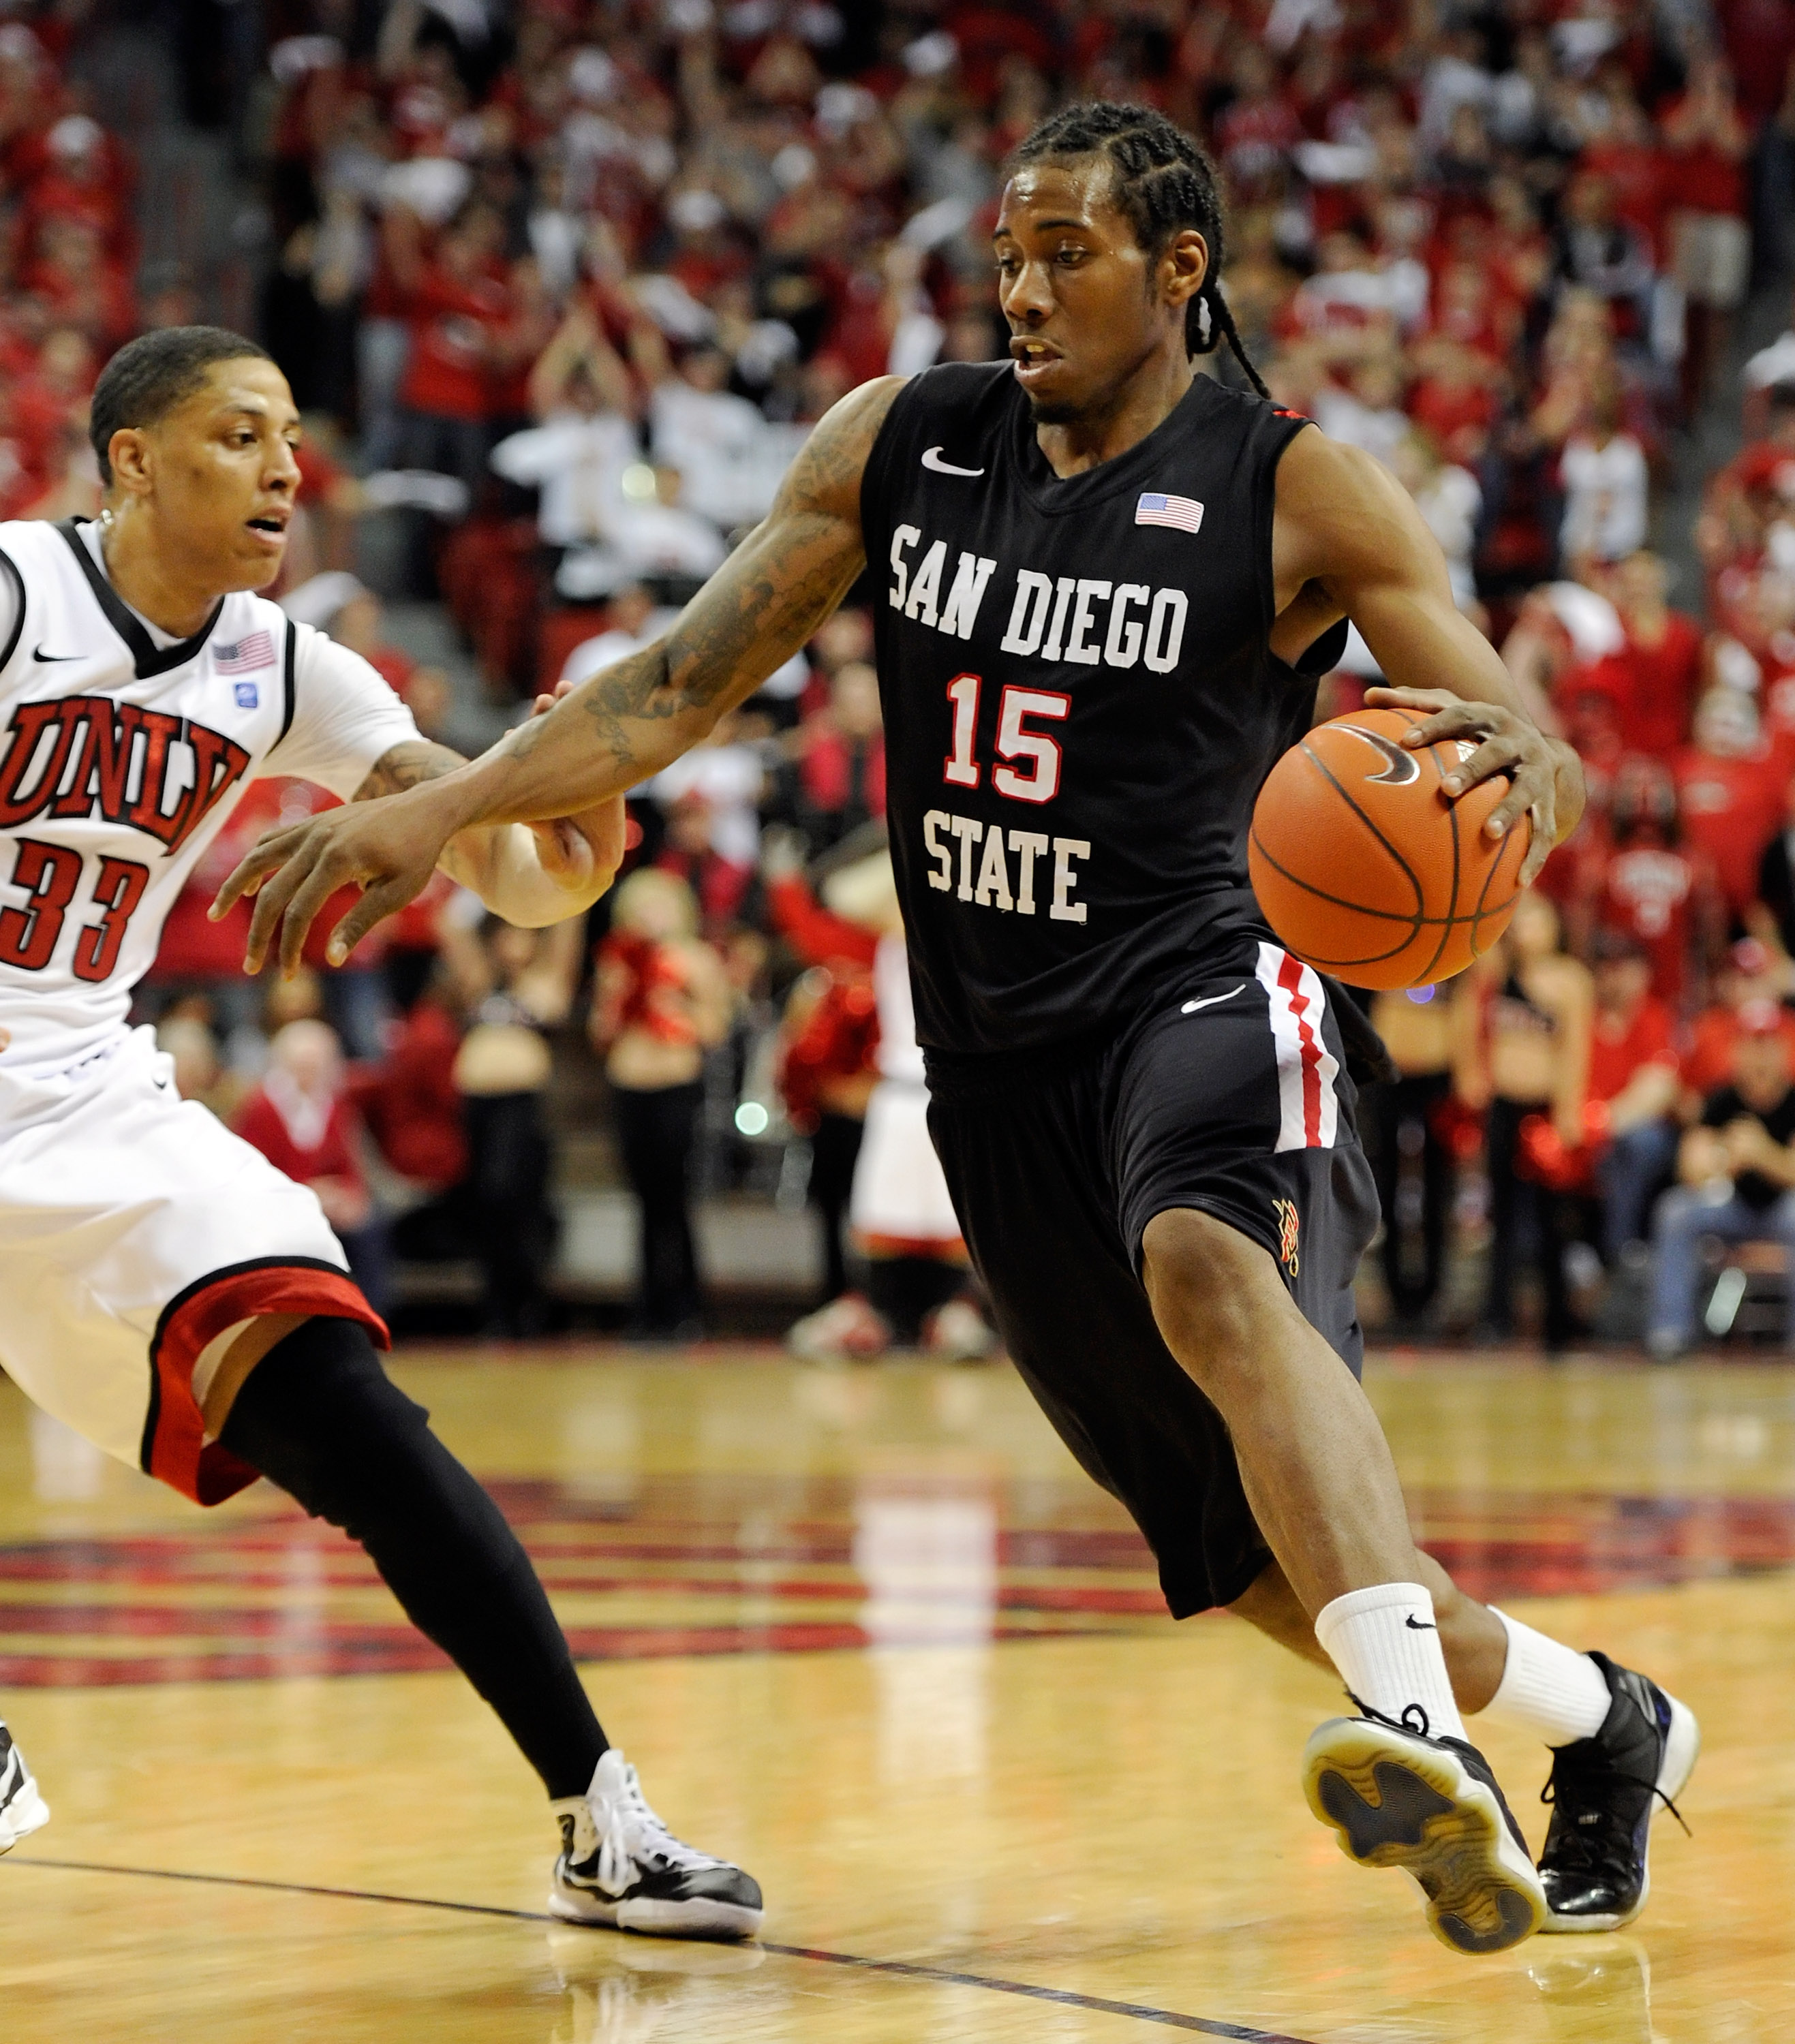 LAS VEGAS, NV - FEBRUARY 12:  Kawhi Leonard #15 of the San Diego State Aztecs drives against Tre'Von Willis #33 of the UNLV Rebels during their game at the Thomas & Mack Center February 12, 2011 in Las Vegas, Nevada. San Diego State won 63-57.  (Photo by